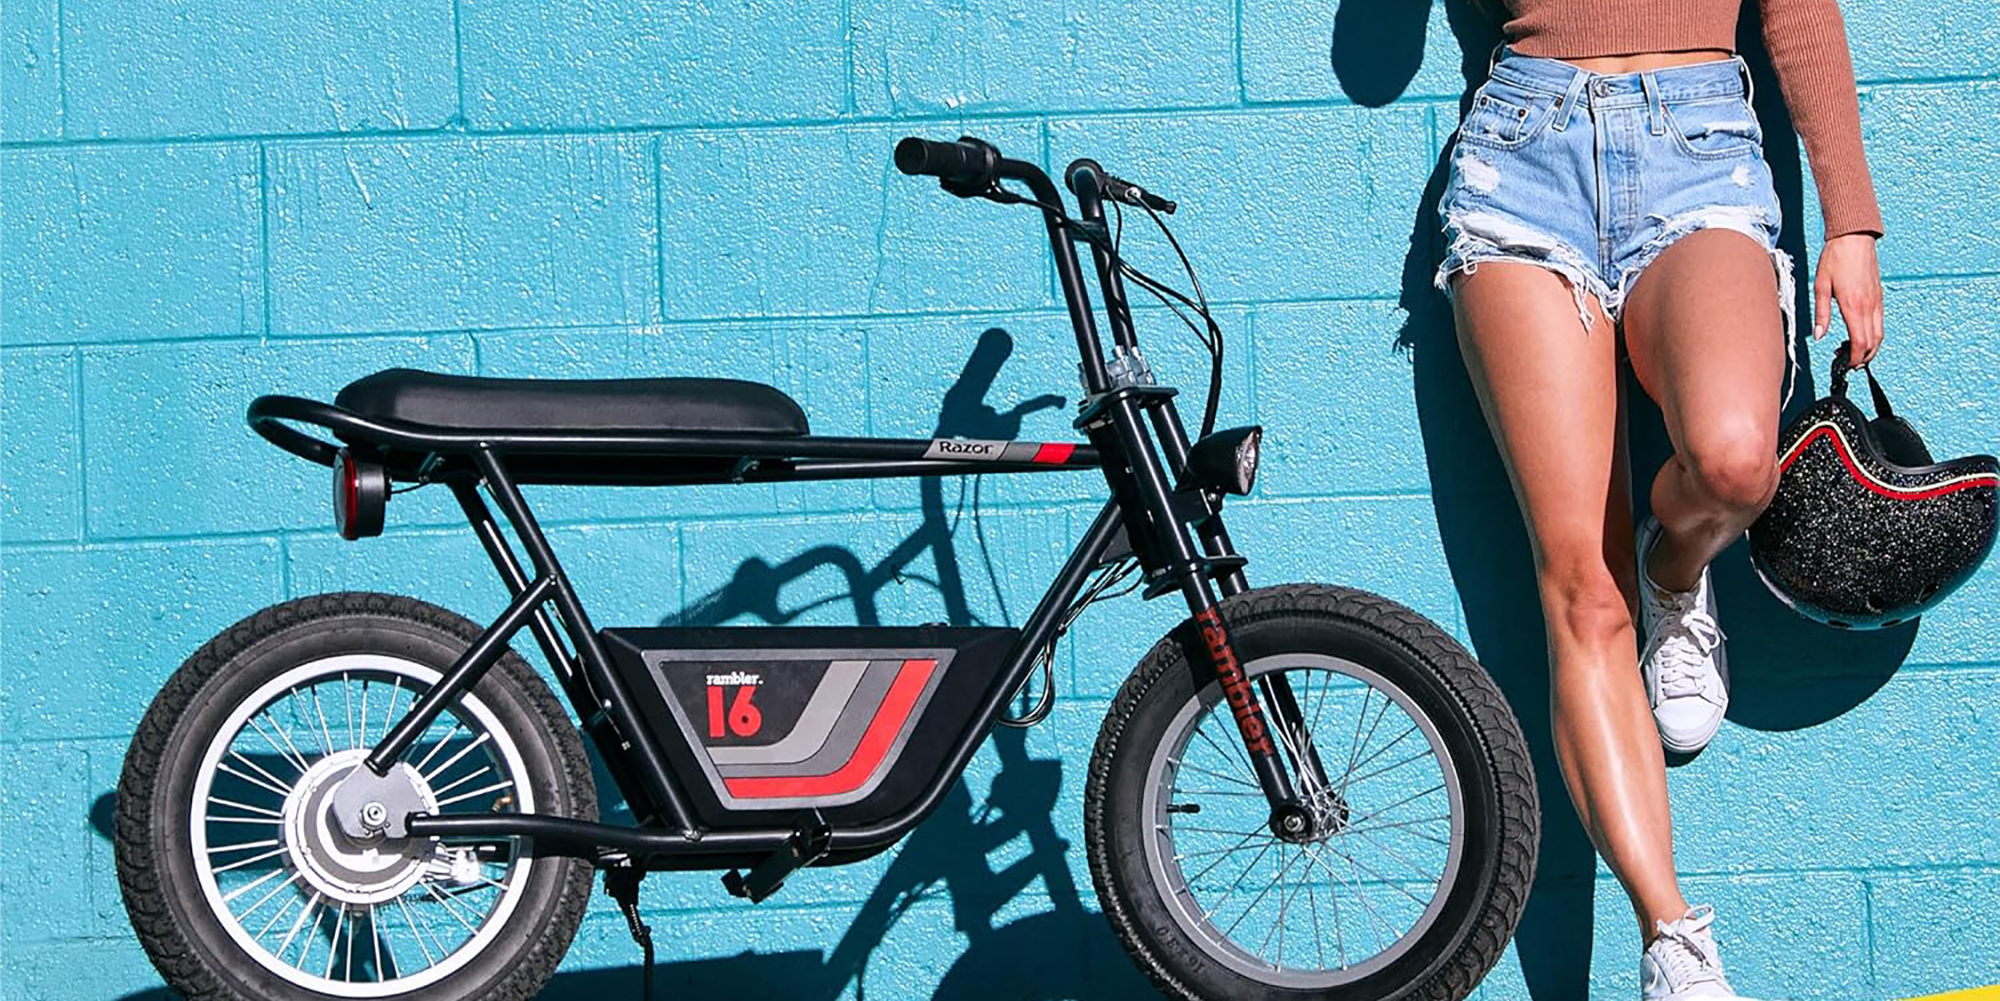 Razor Rambler 16 electric minibike standing next to woman against bright blue wall, within post for Snapcycle R1 Pro e-bike